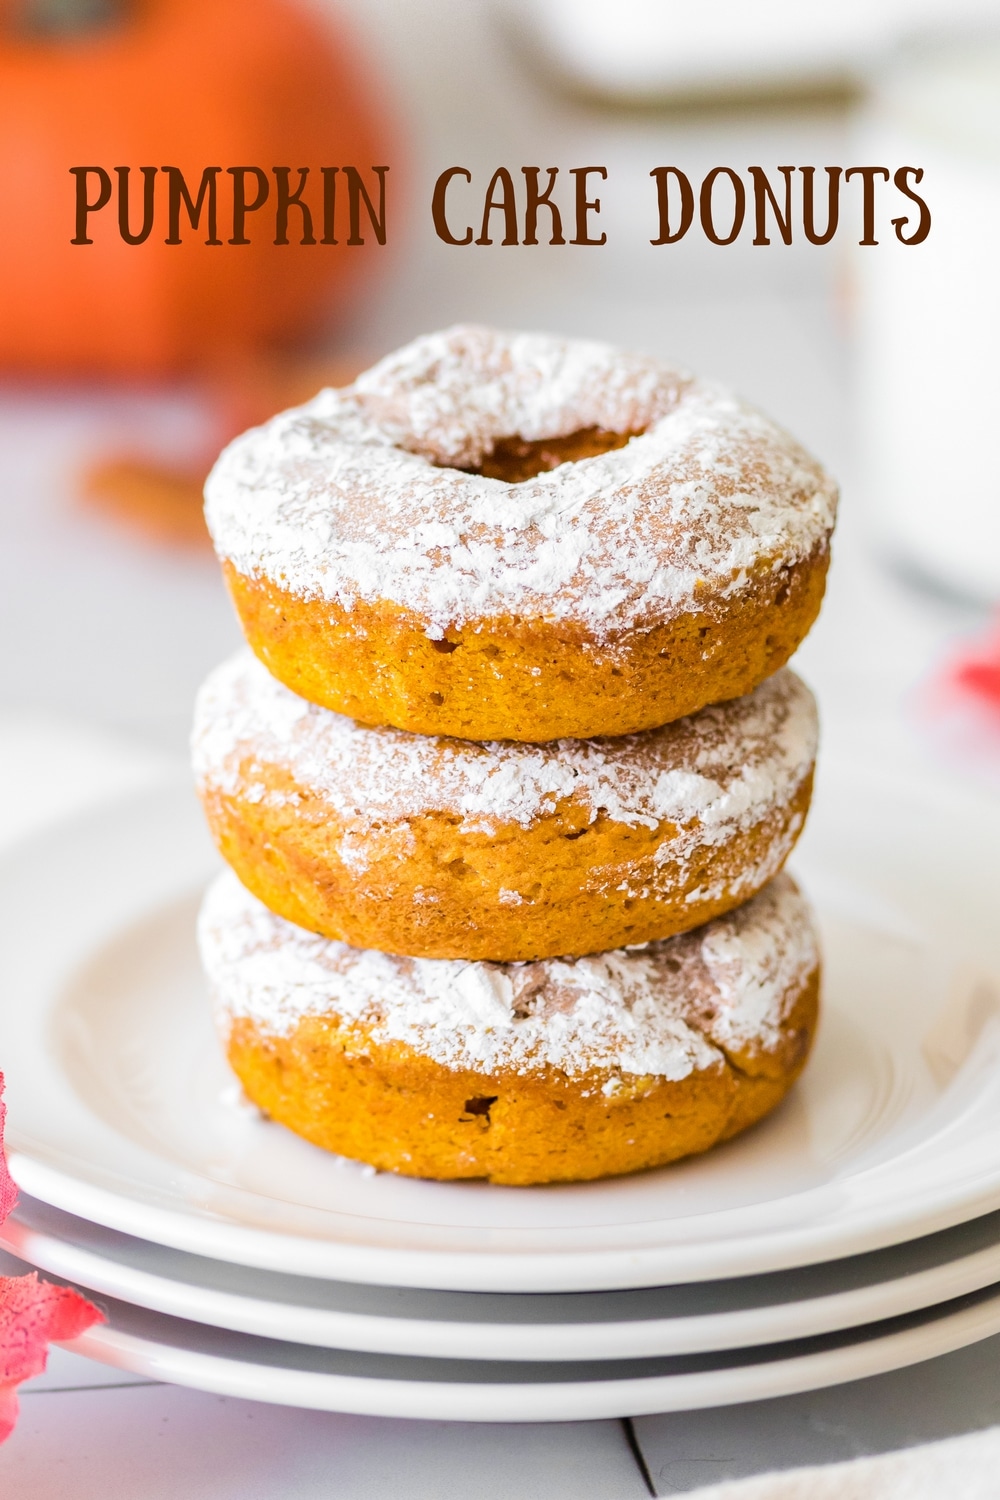 Pumpkin Cake Donuts are here to celebrate the season and turn your regular breakfast routine into something special. The perfect sweet treat with your morning coffee or tea. via @cmpollak1